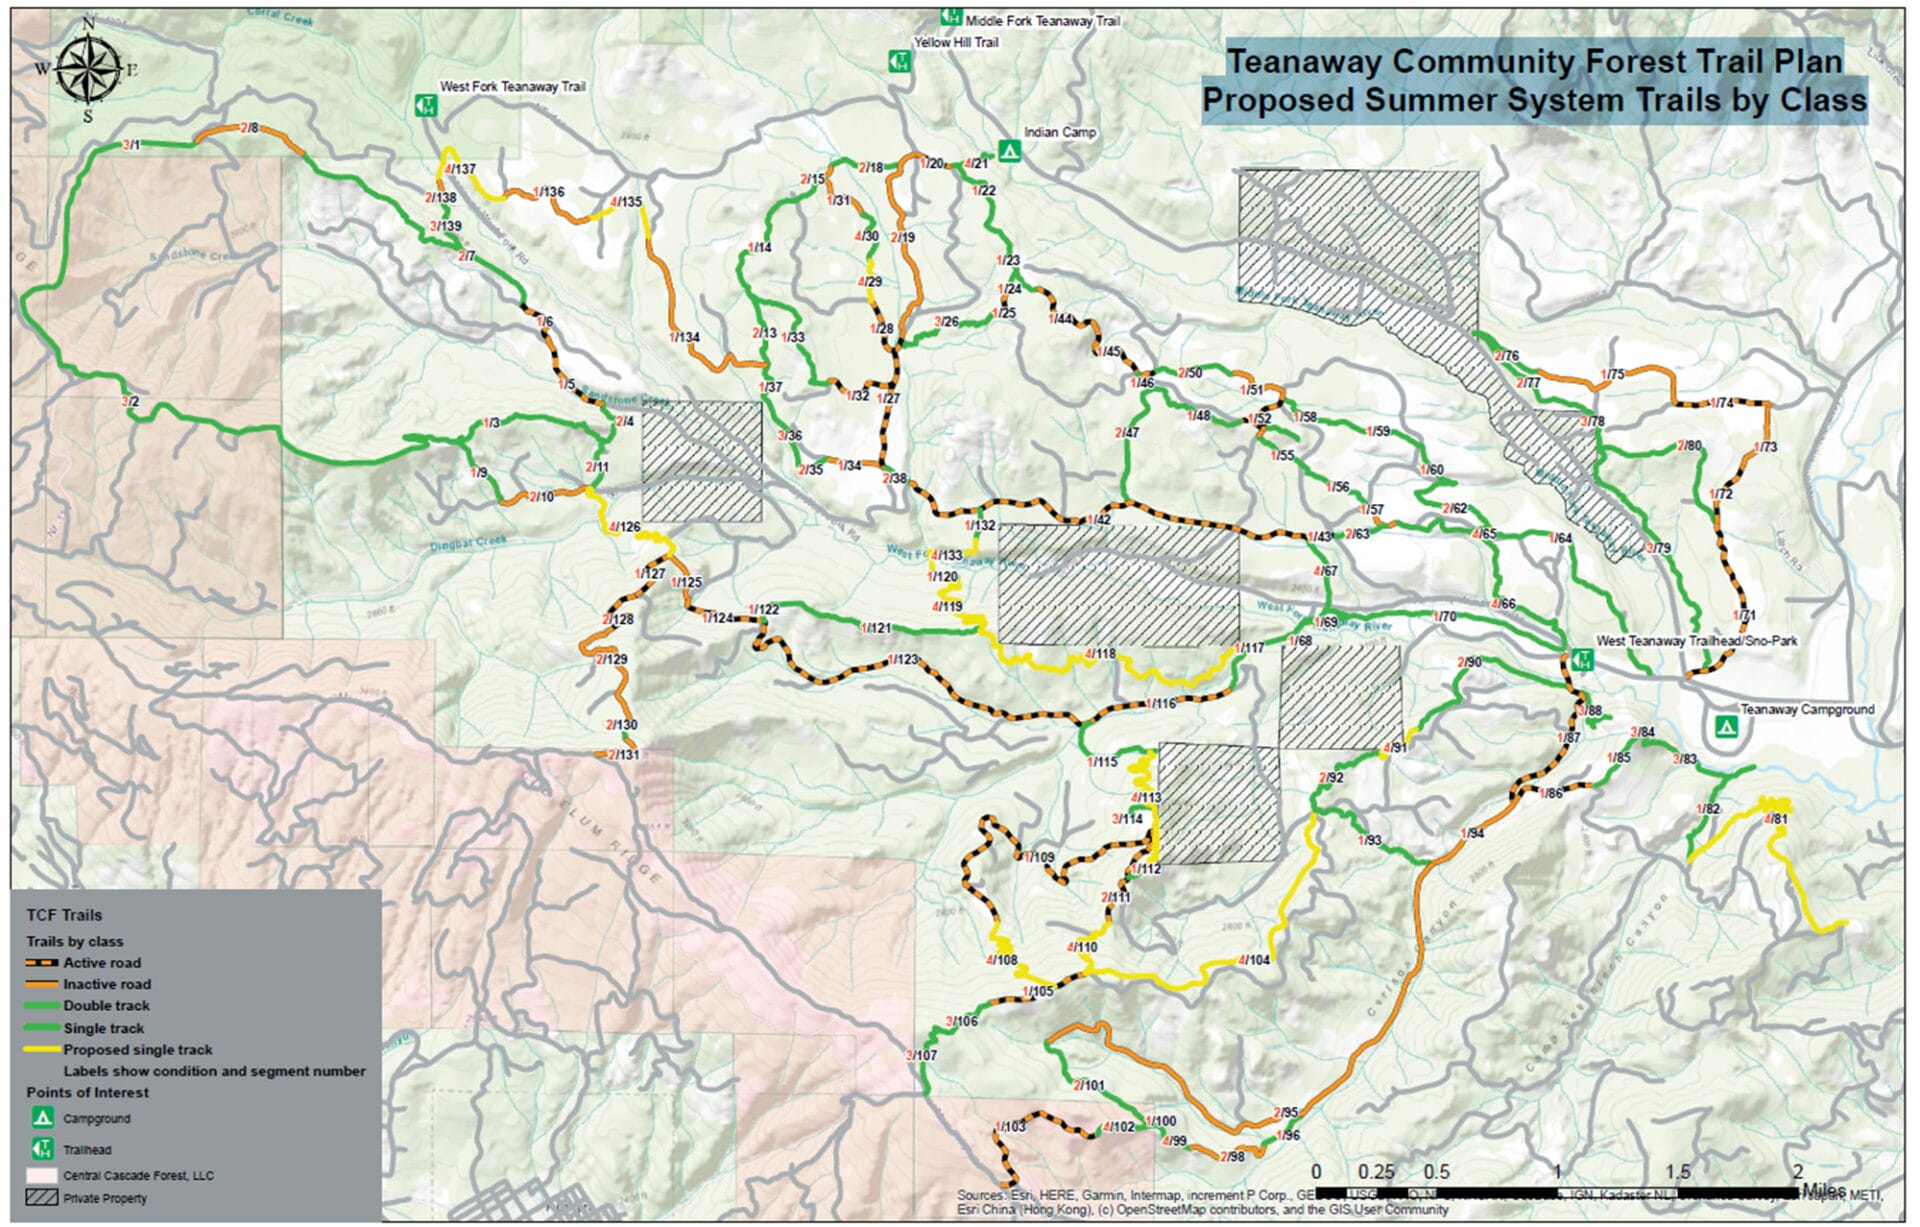 Map showing the Teanaway Community Forest Trail Plan Proposed Summer System Trails by Class